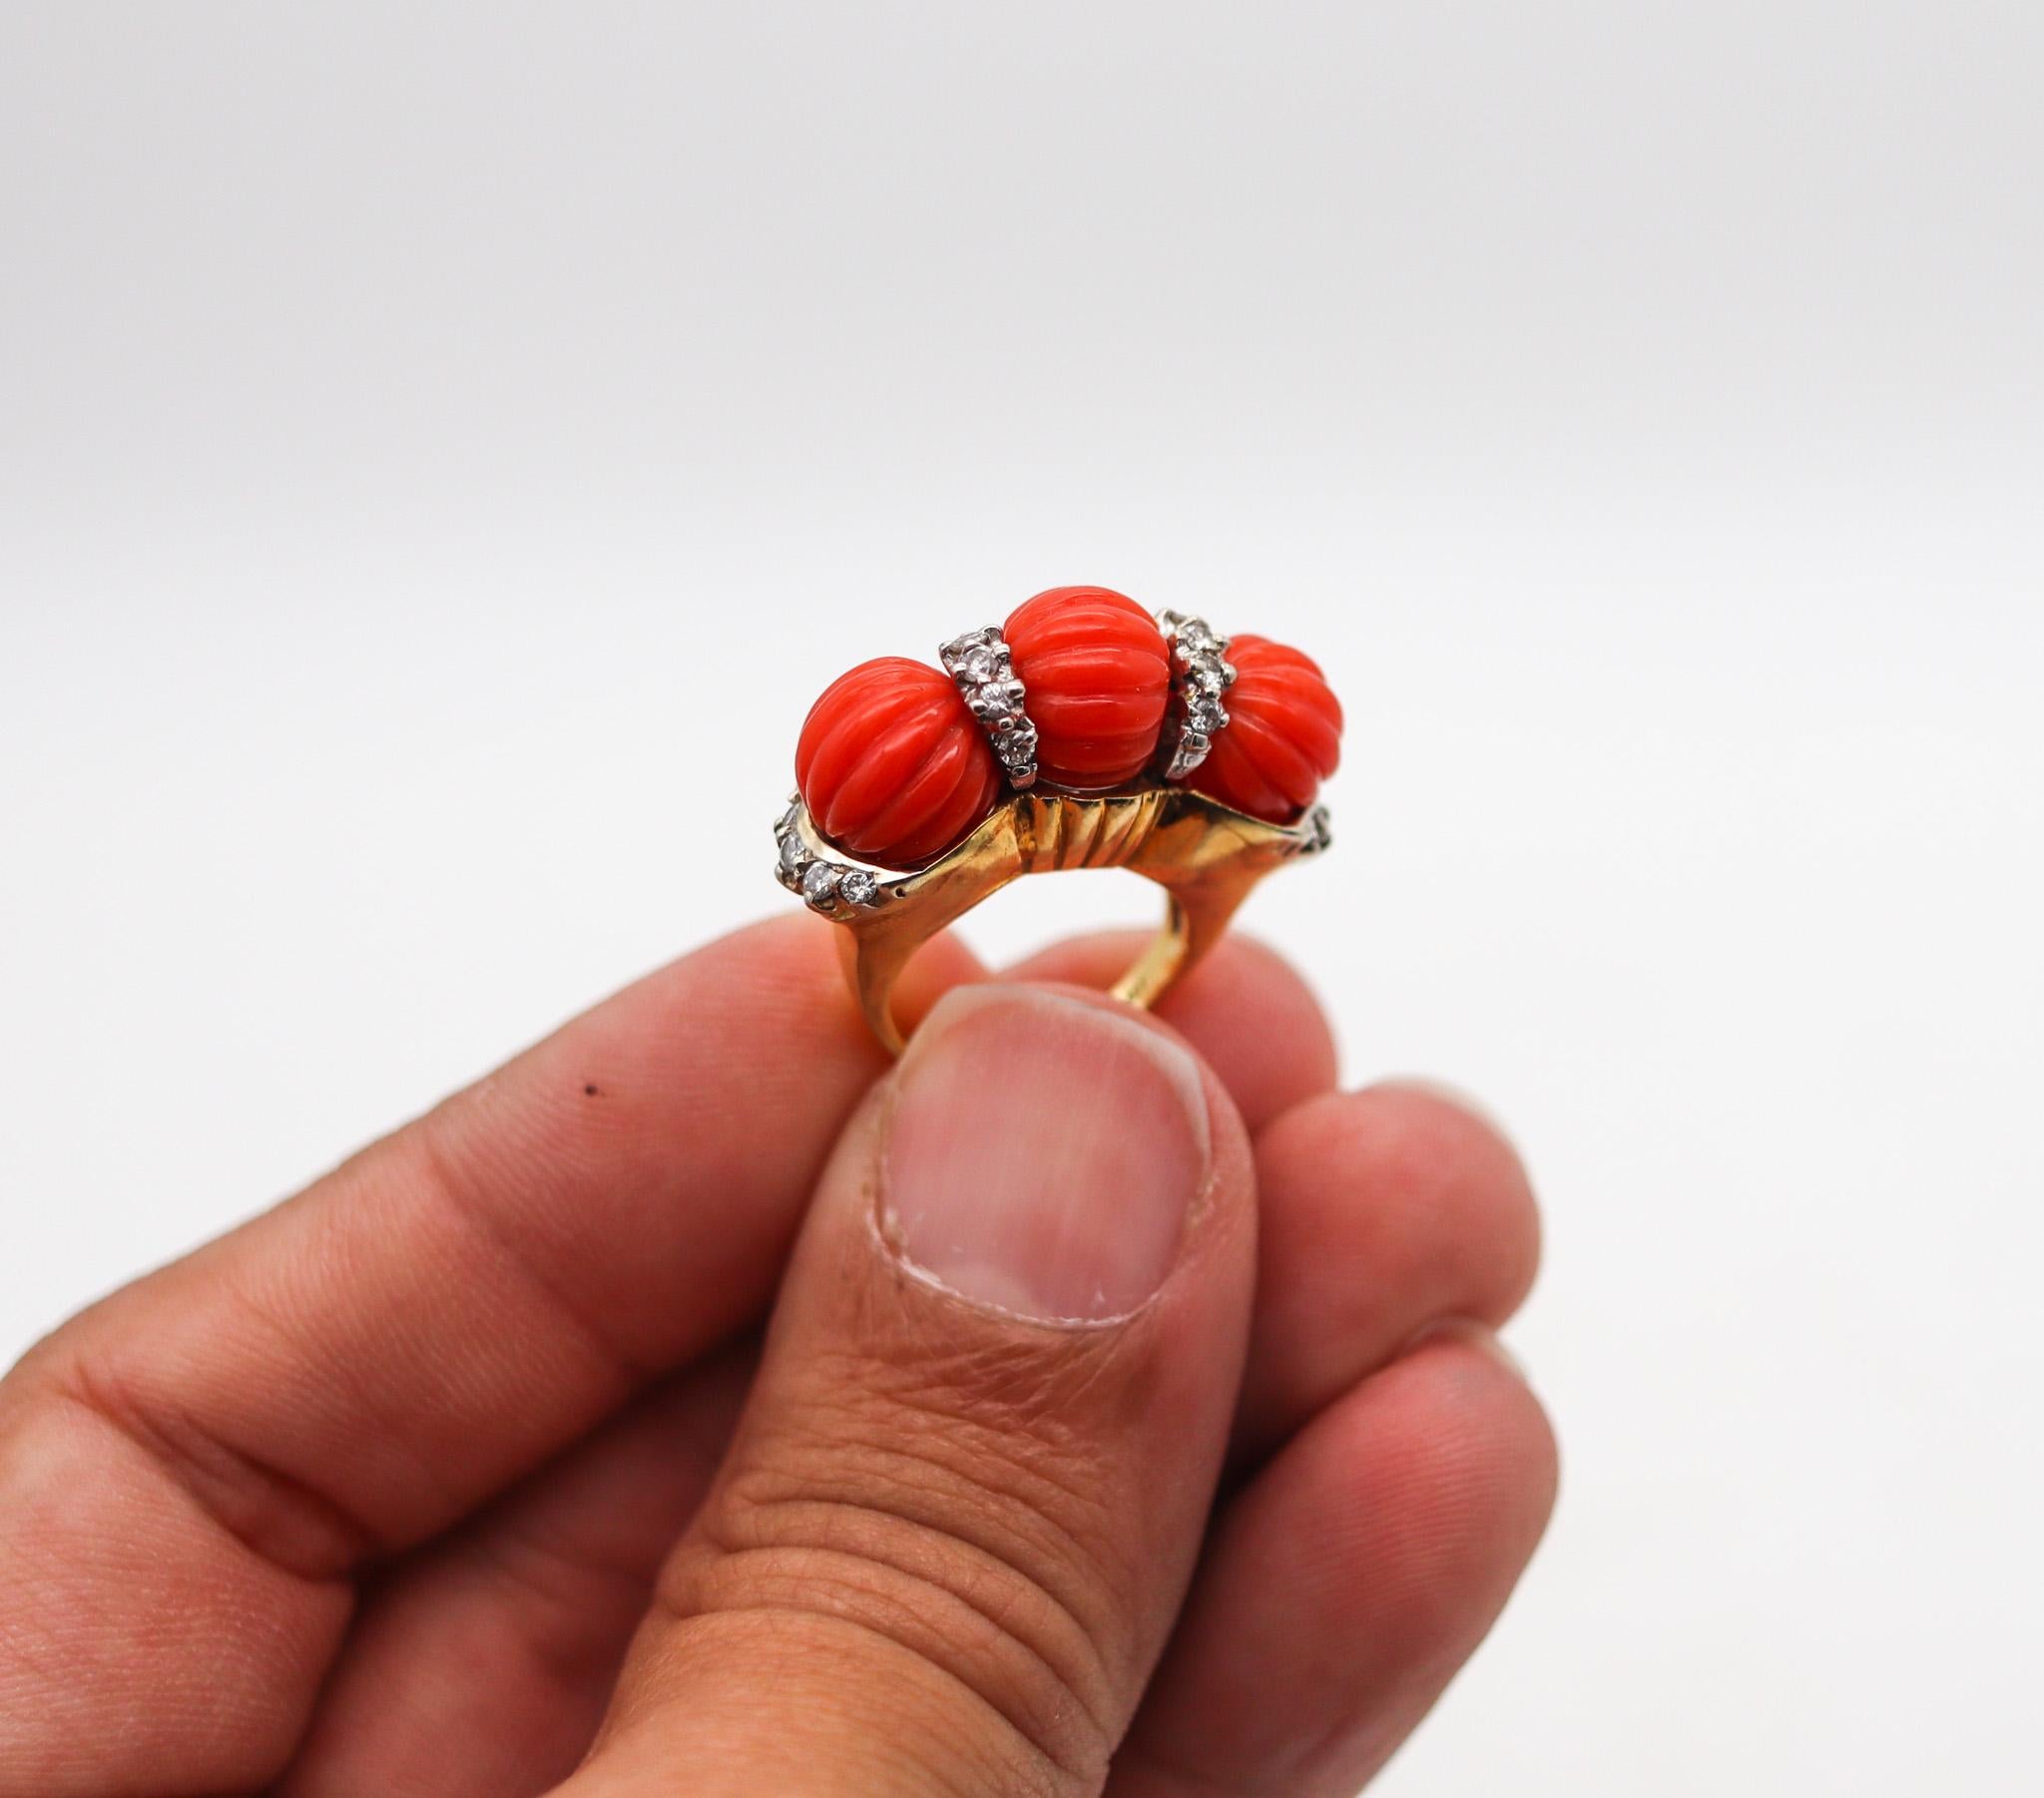 Women's Francesco Passaretta 1970 Fluted Sardinian Coral Ring In 18Kt Gold With Diamonds For Sale